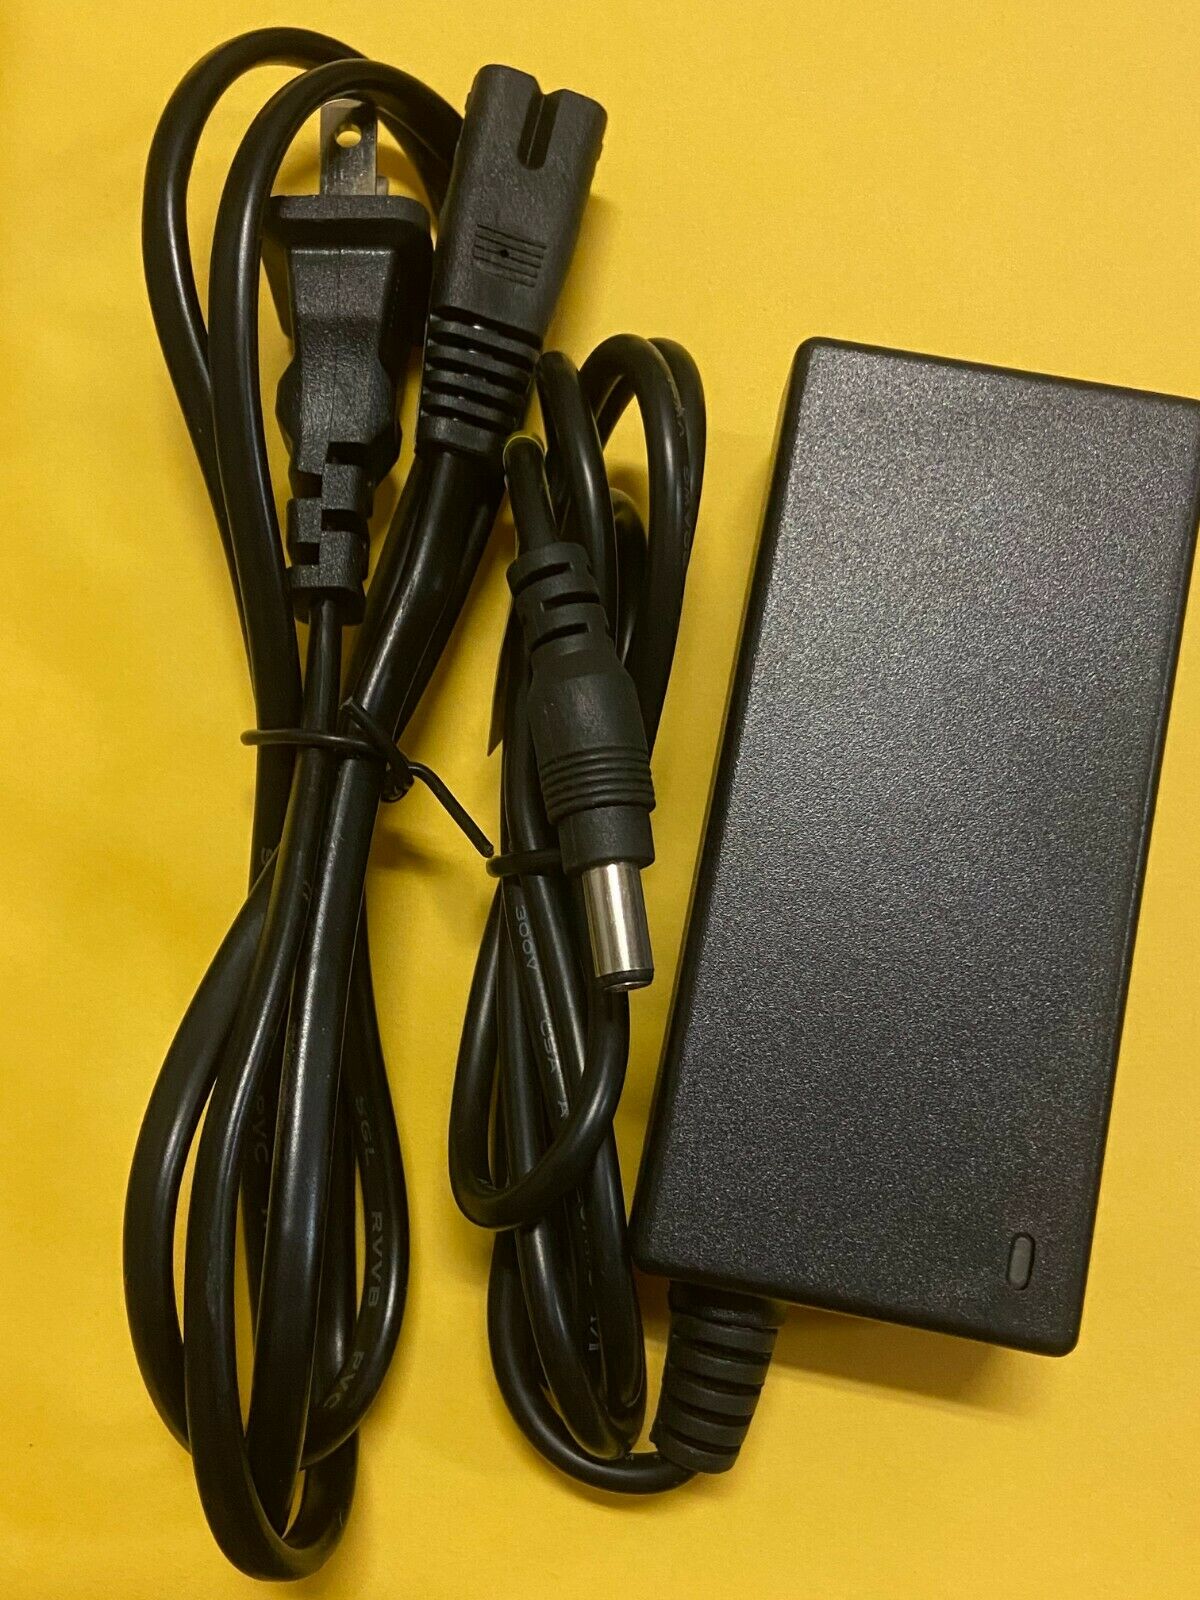 19V AC DC Adapter Power Charger for BA-301 Inogen One G2 G3 Concentrator New Input Voltage 100-240 - Click Image to Close